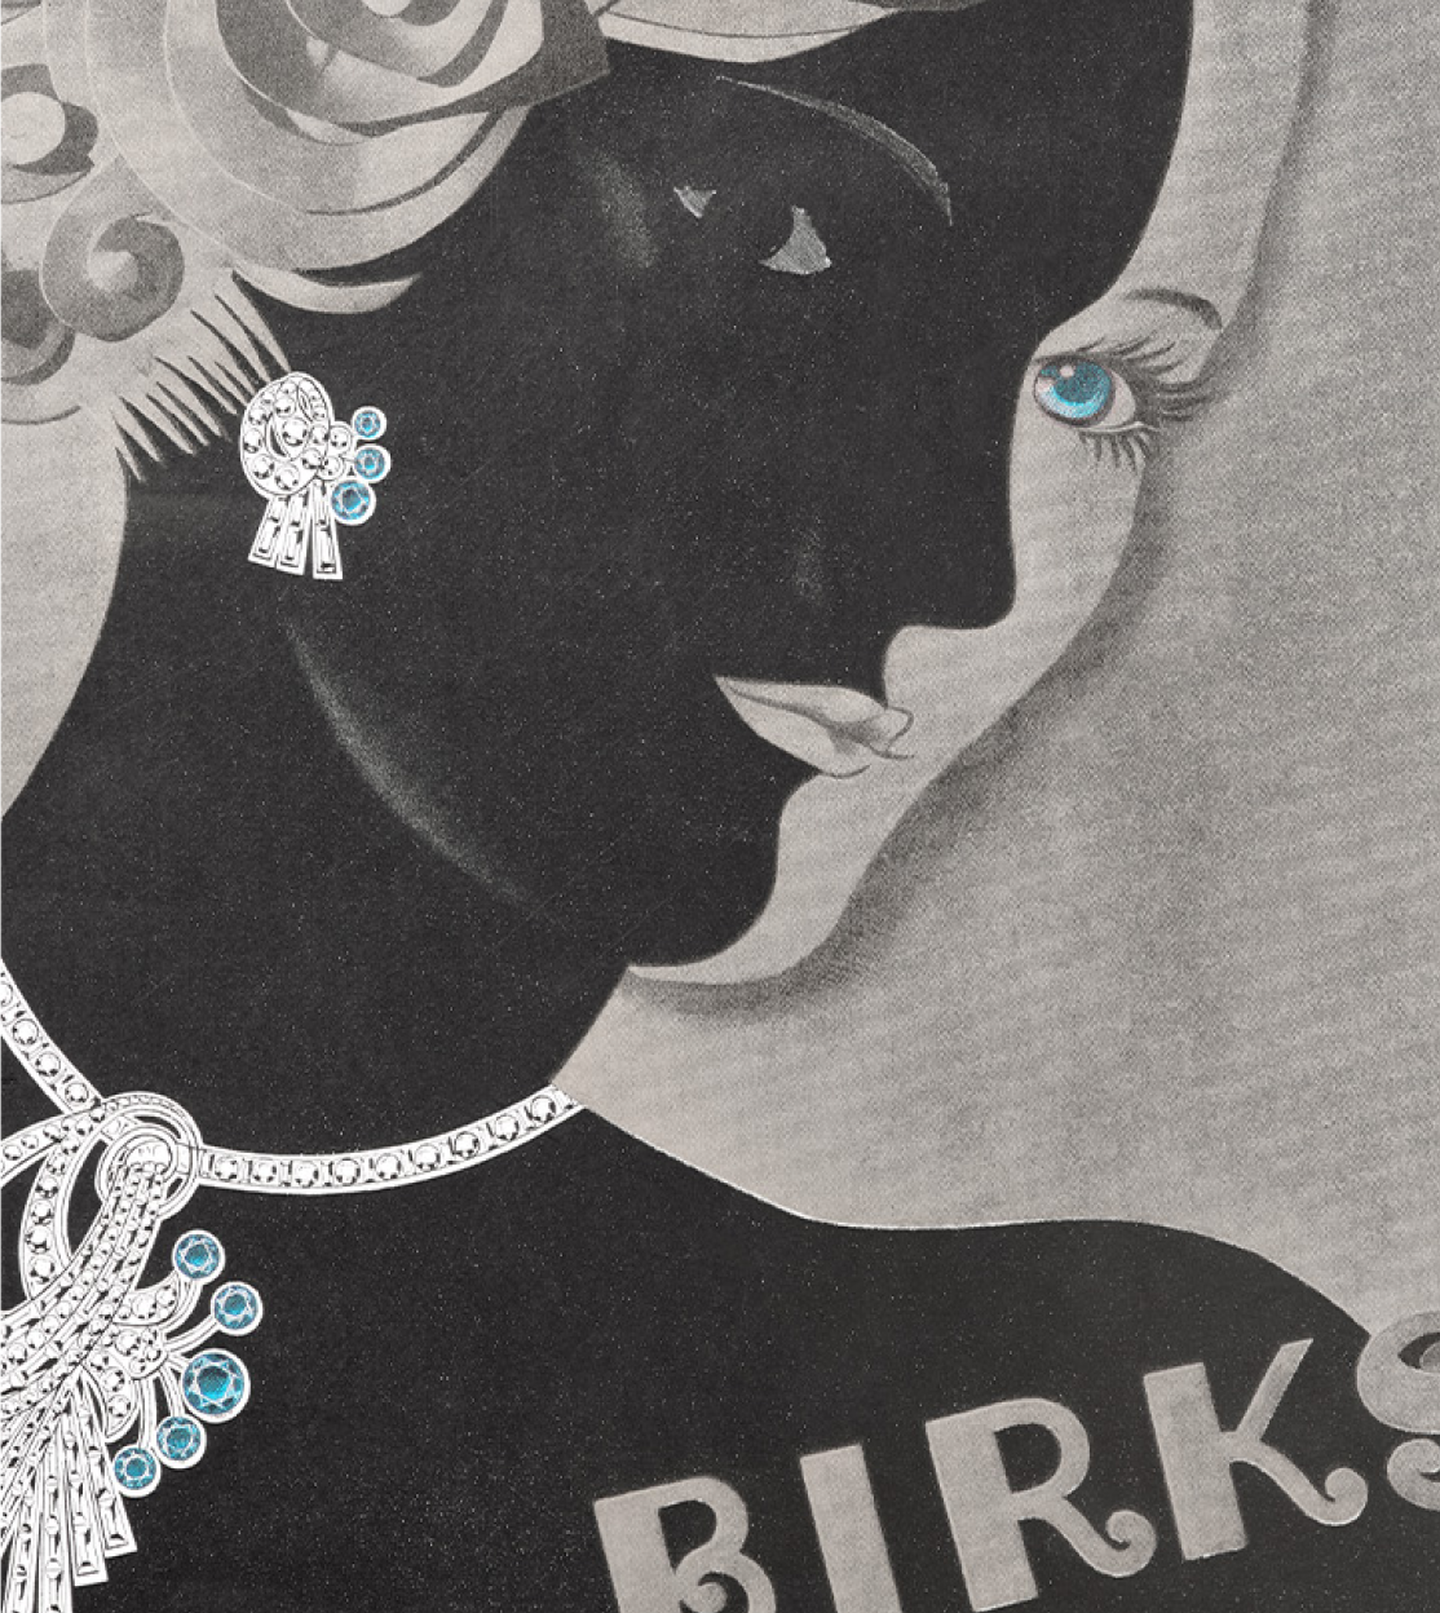 A black and white illustration of a woman wearing sapphire and diamond jewelry